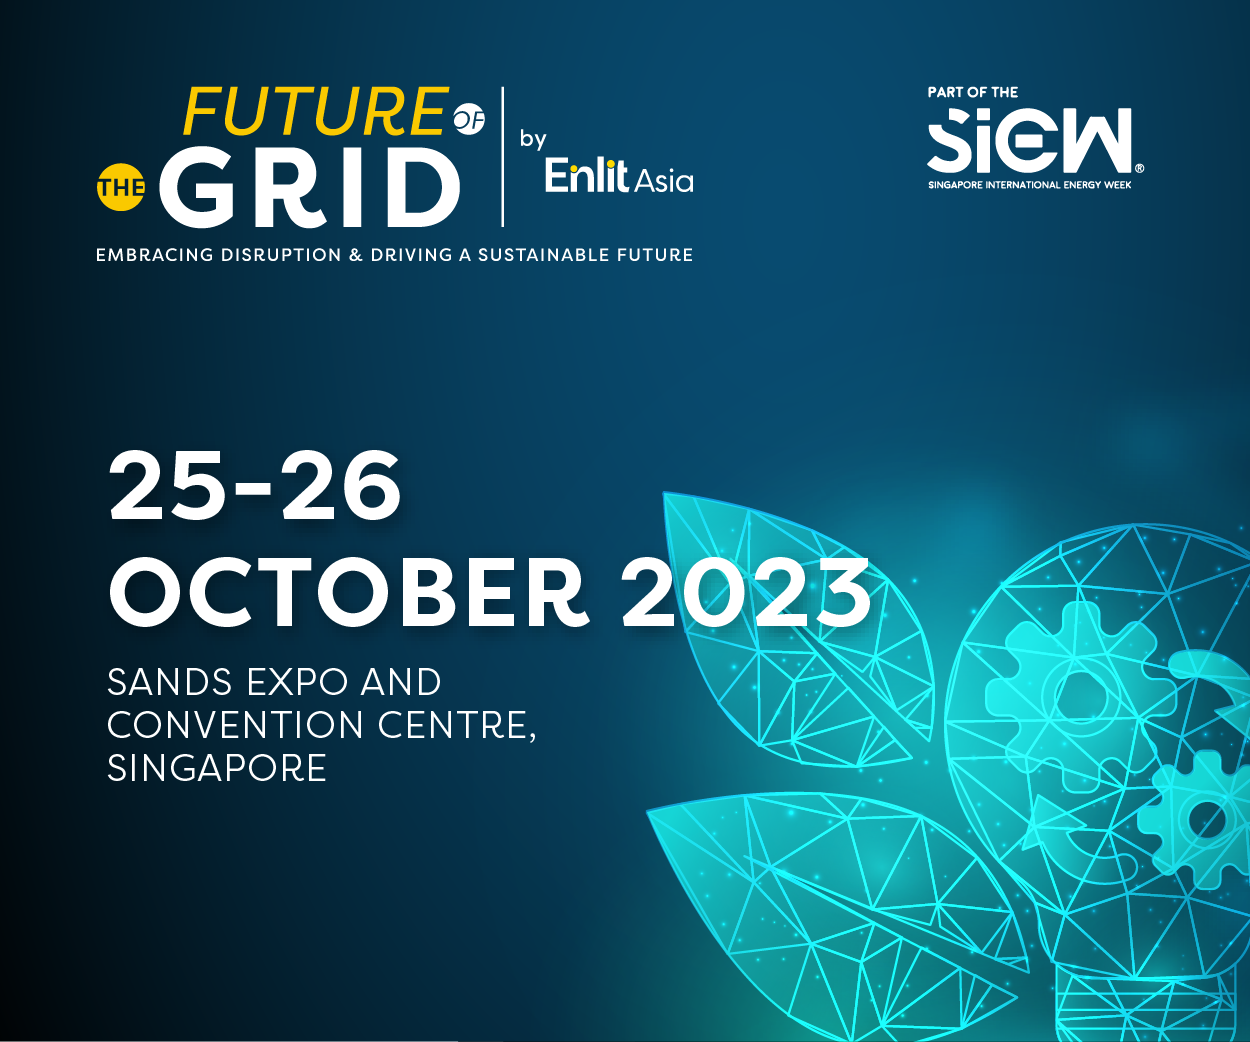 Future of the Grid (FOTG) 2023